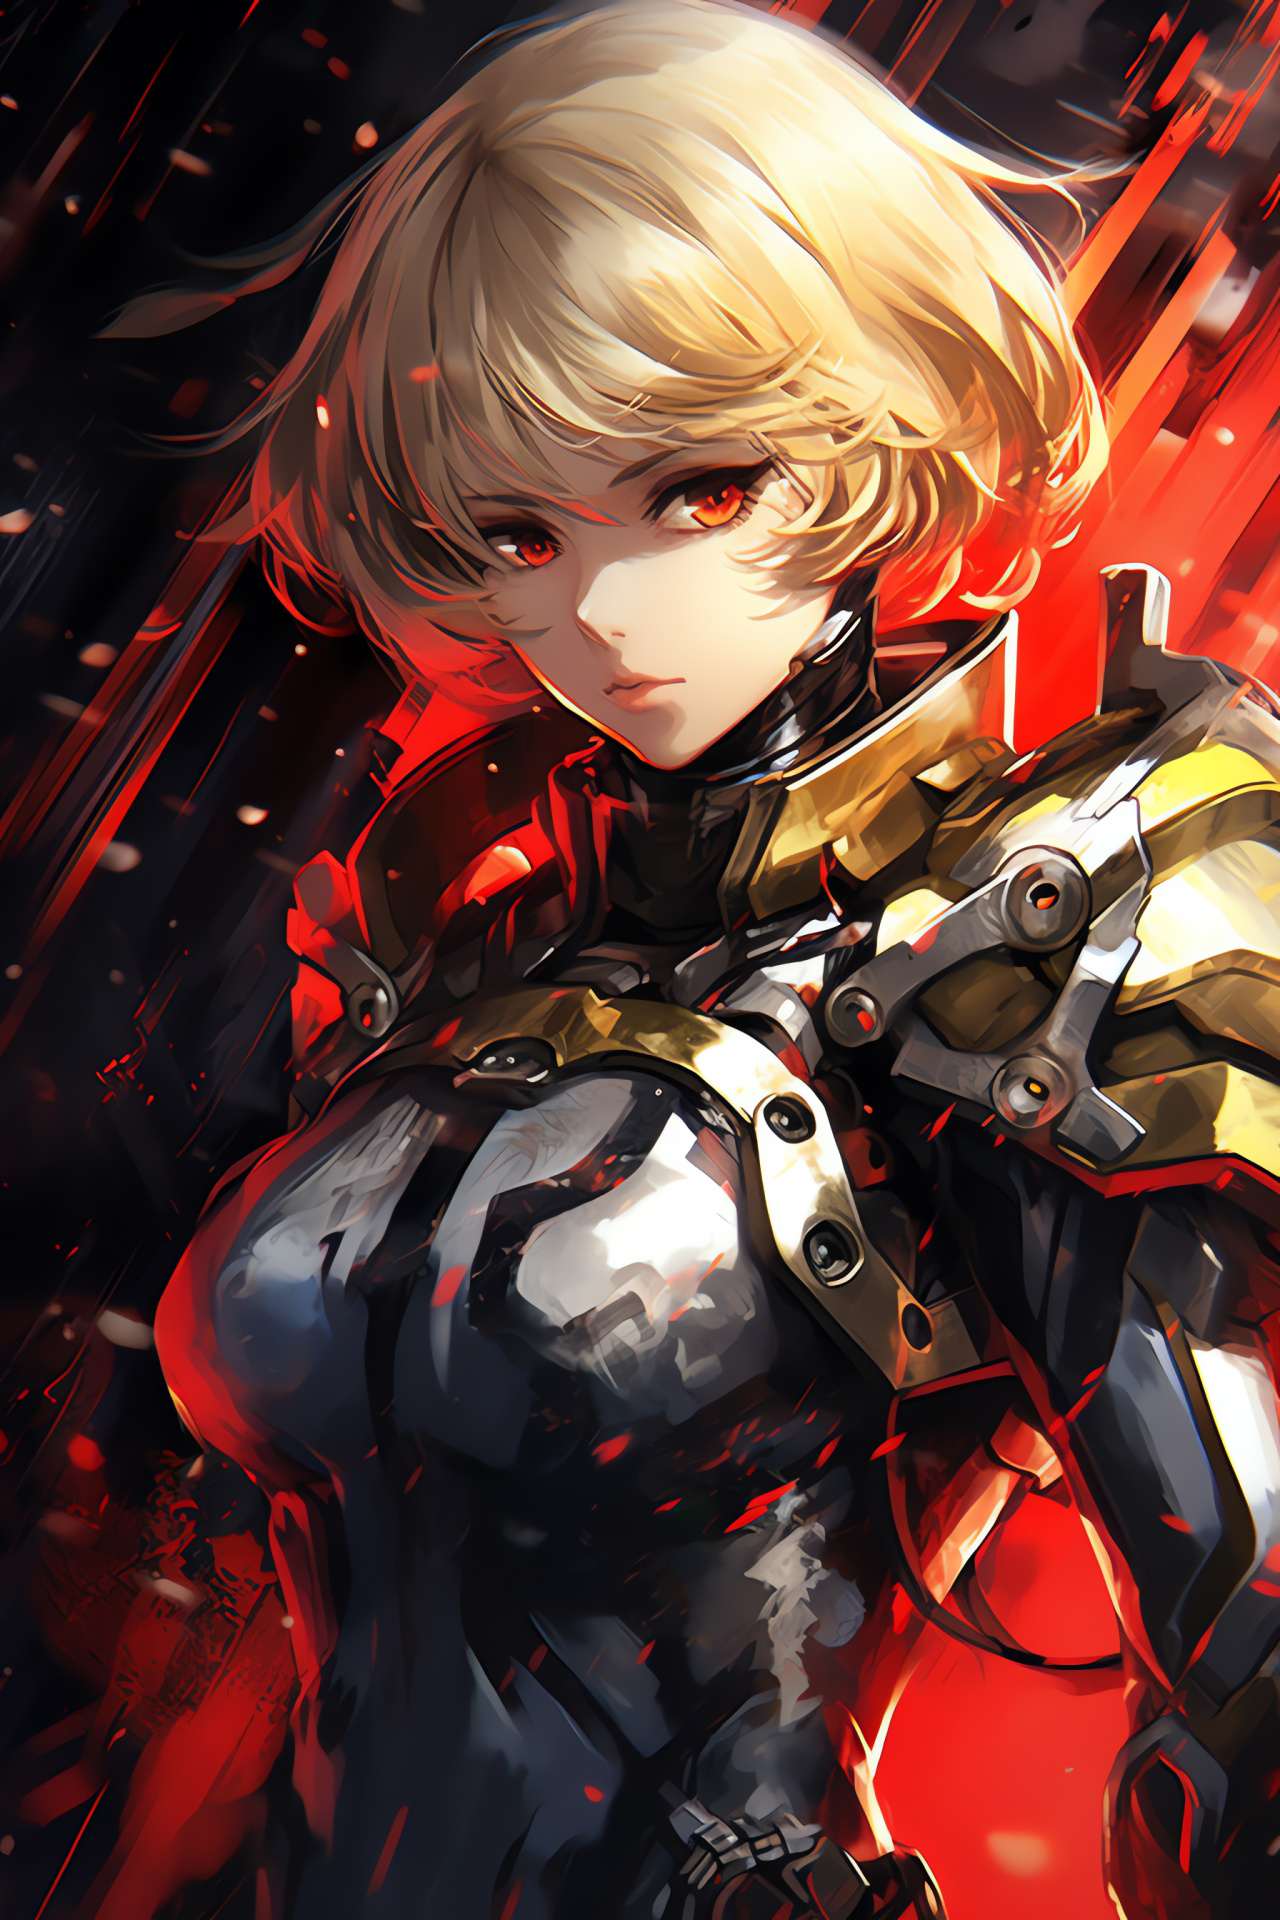 Aigis combat mode, Robotic character action, Fast-paced battle, Game animation, HD Phone Image